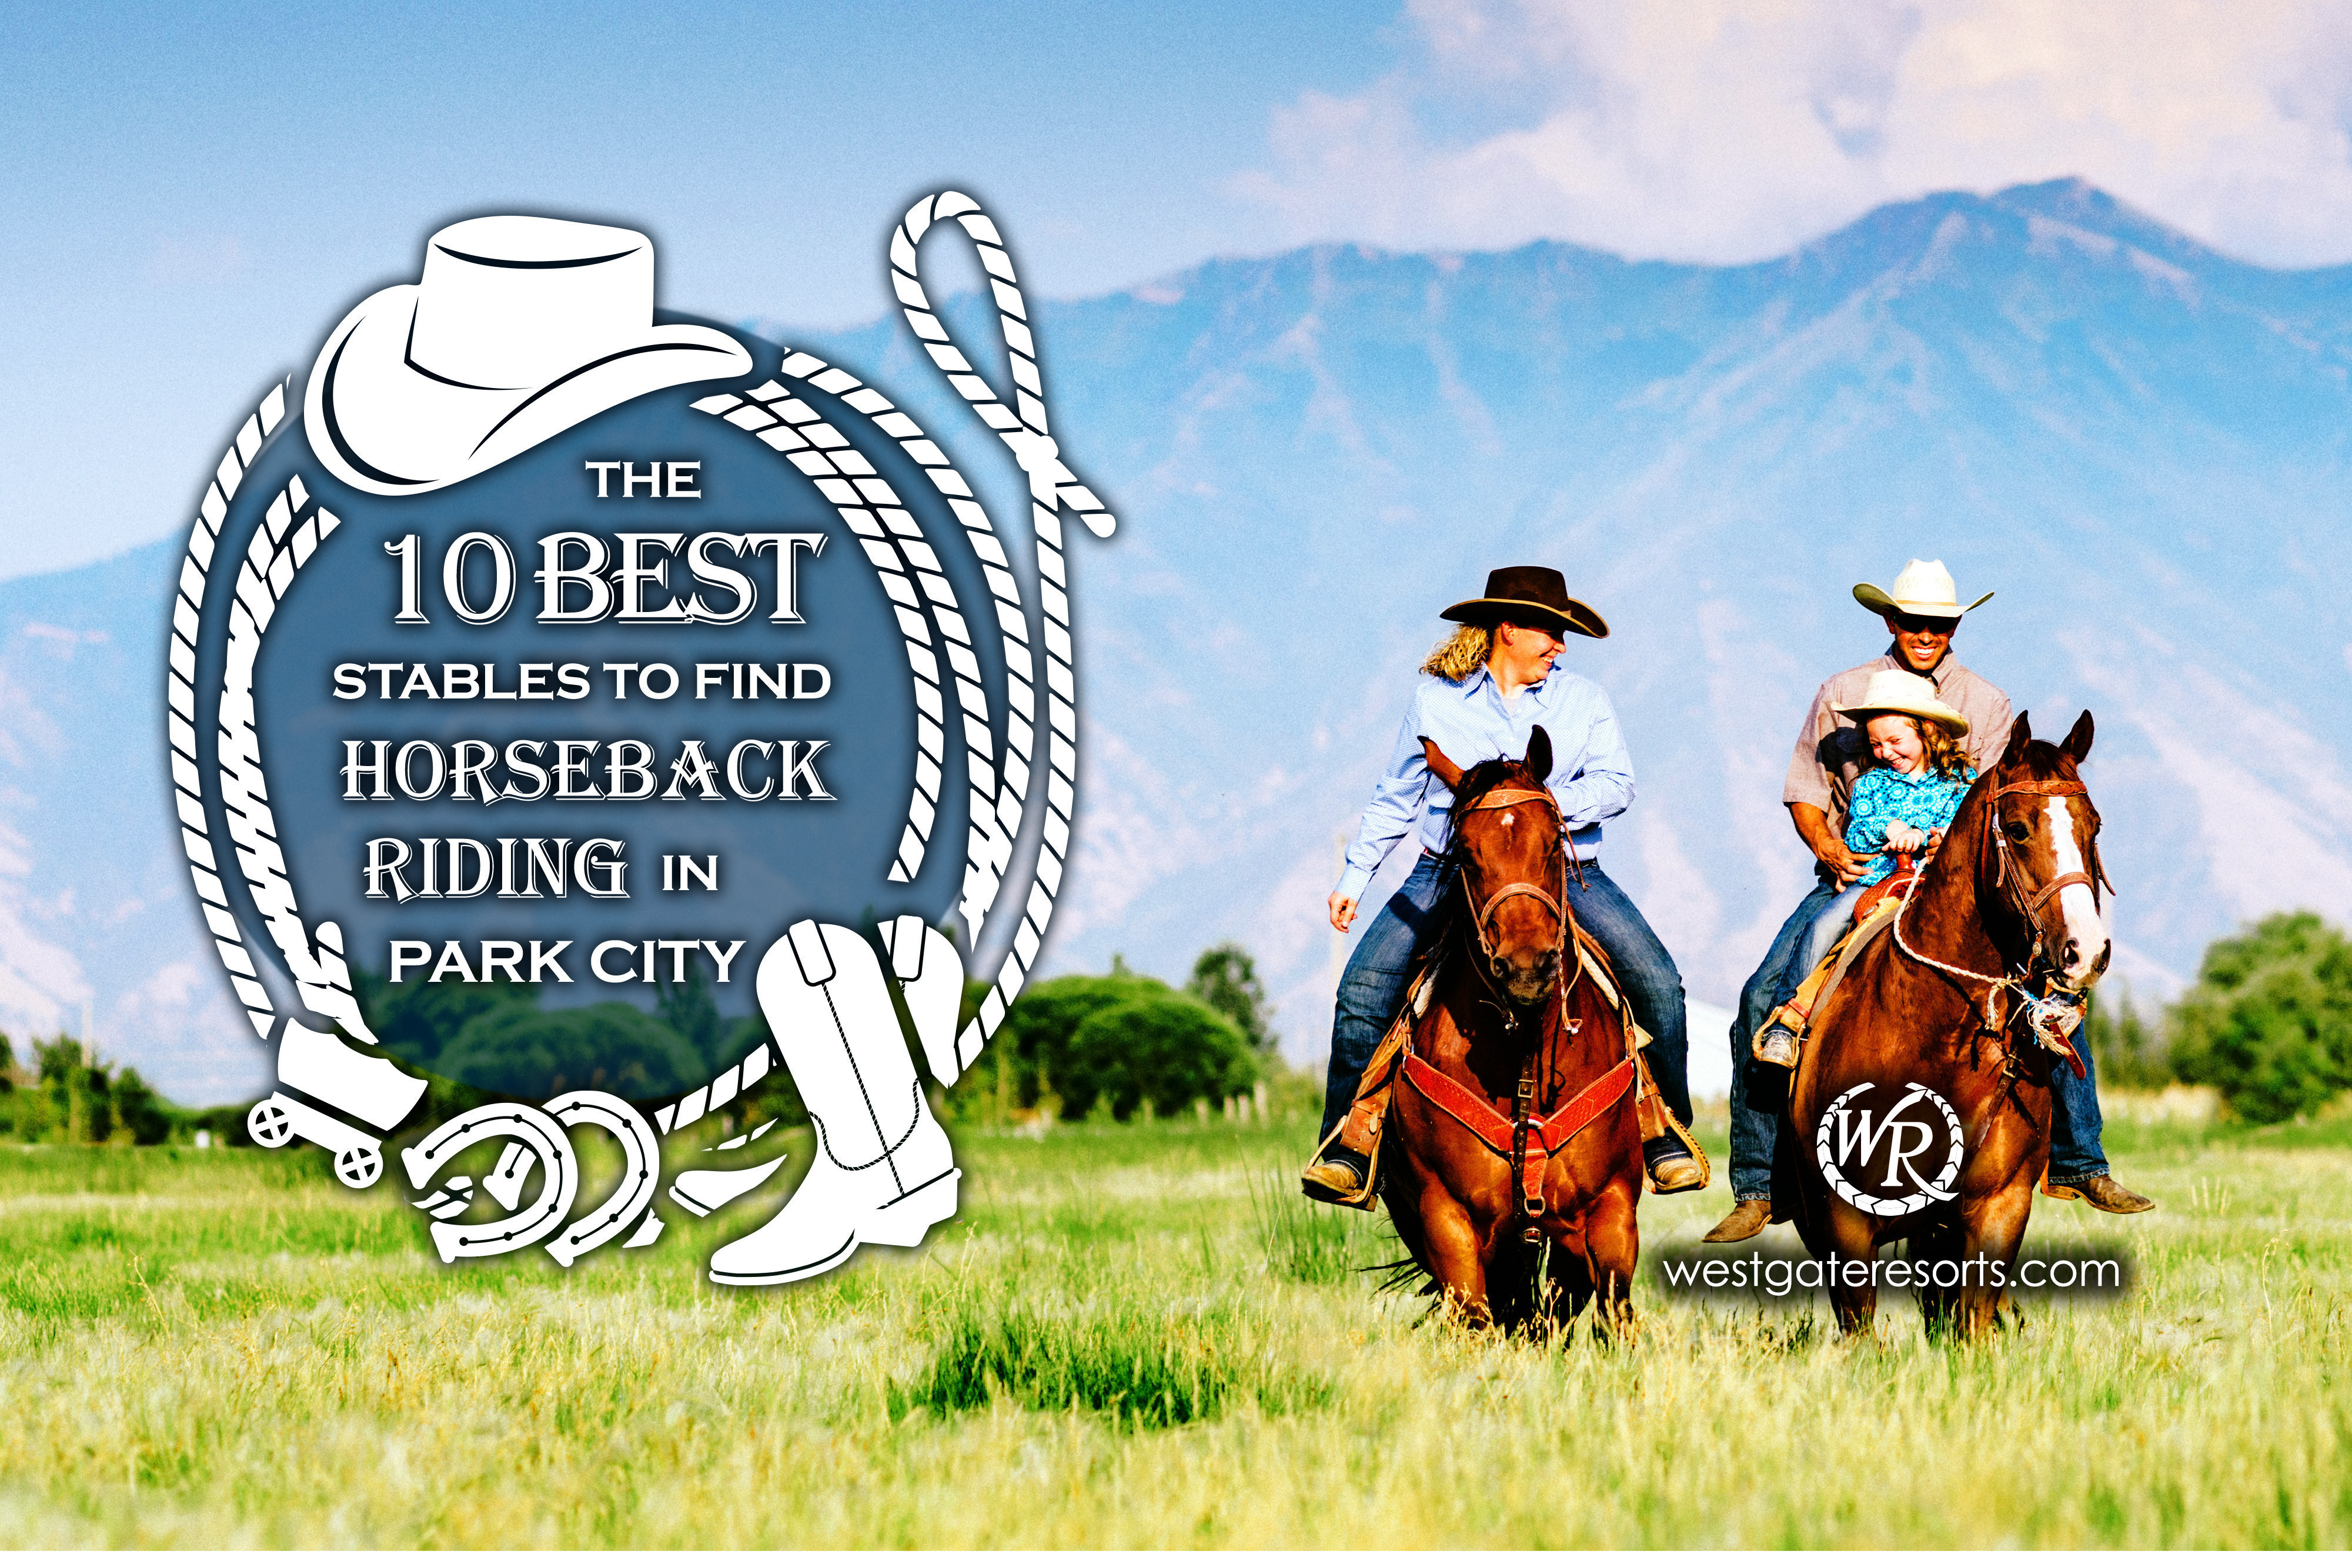 The 10 Best Stables to Find Horseback Riding in Park City